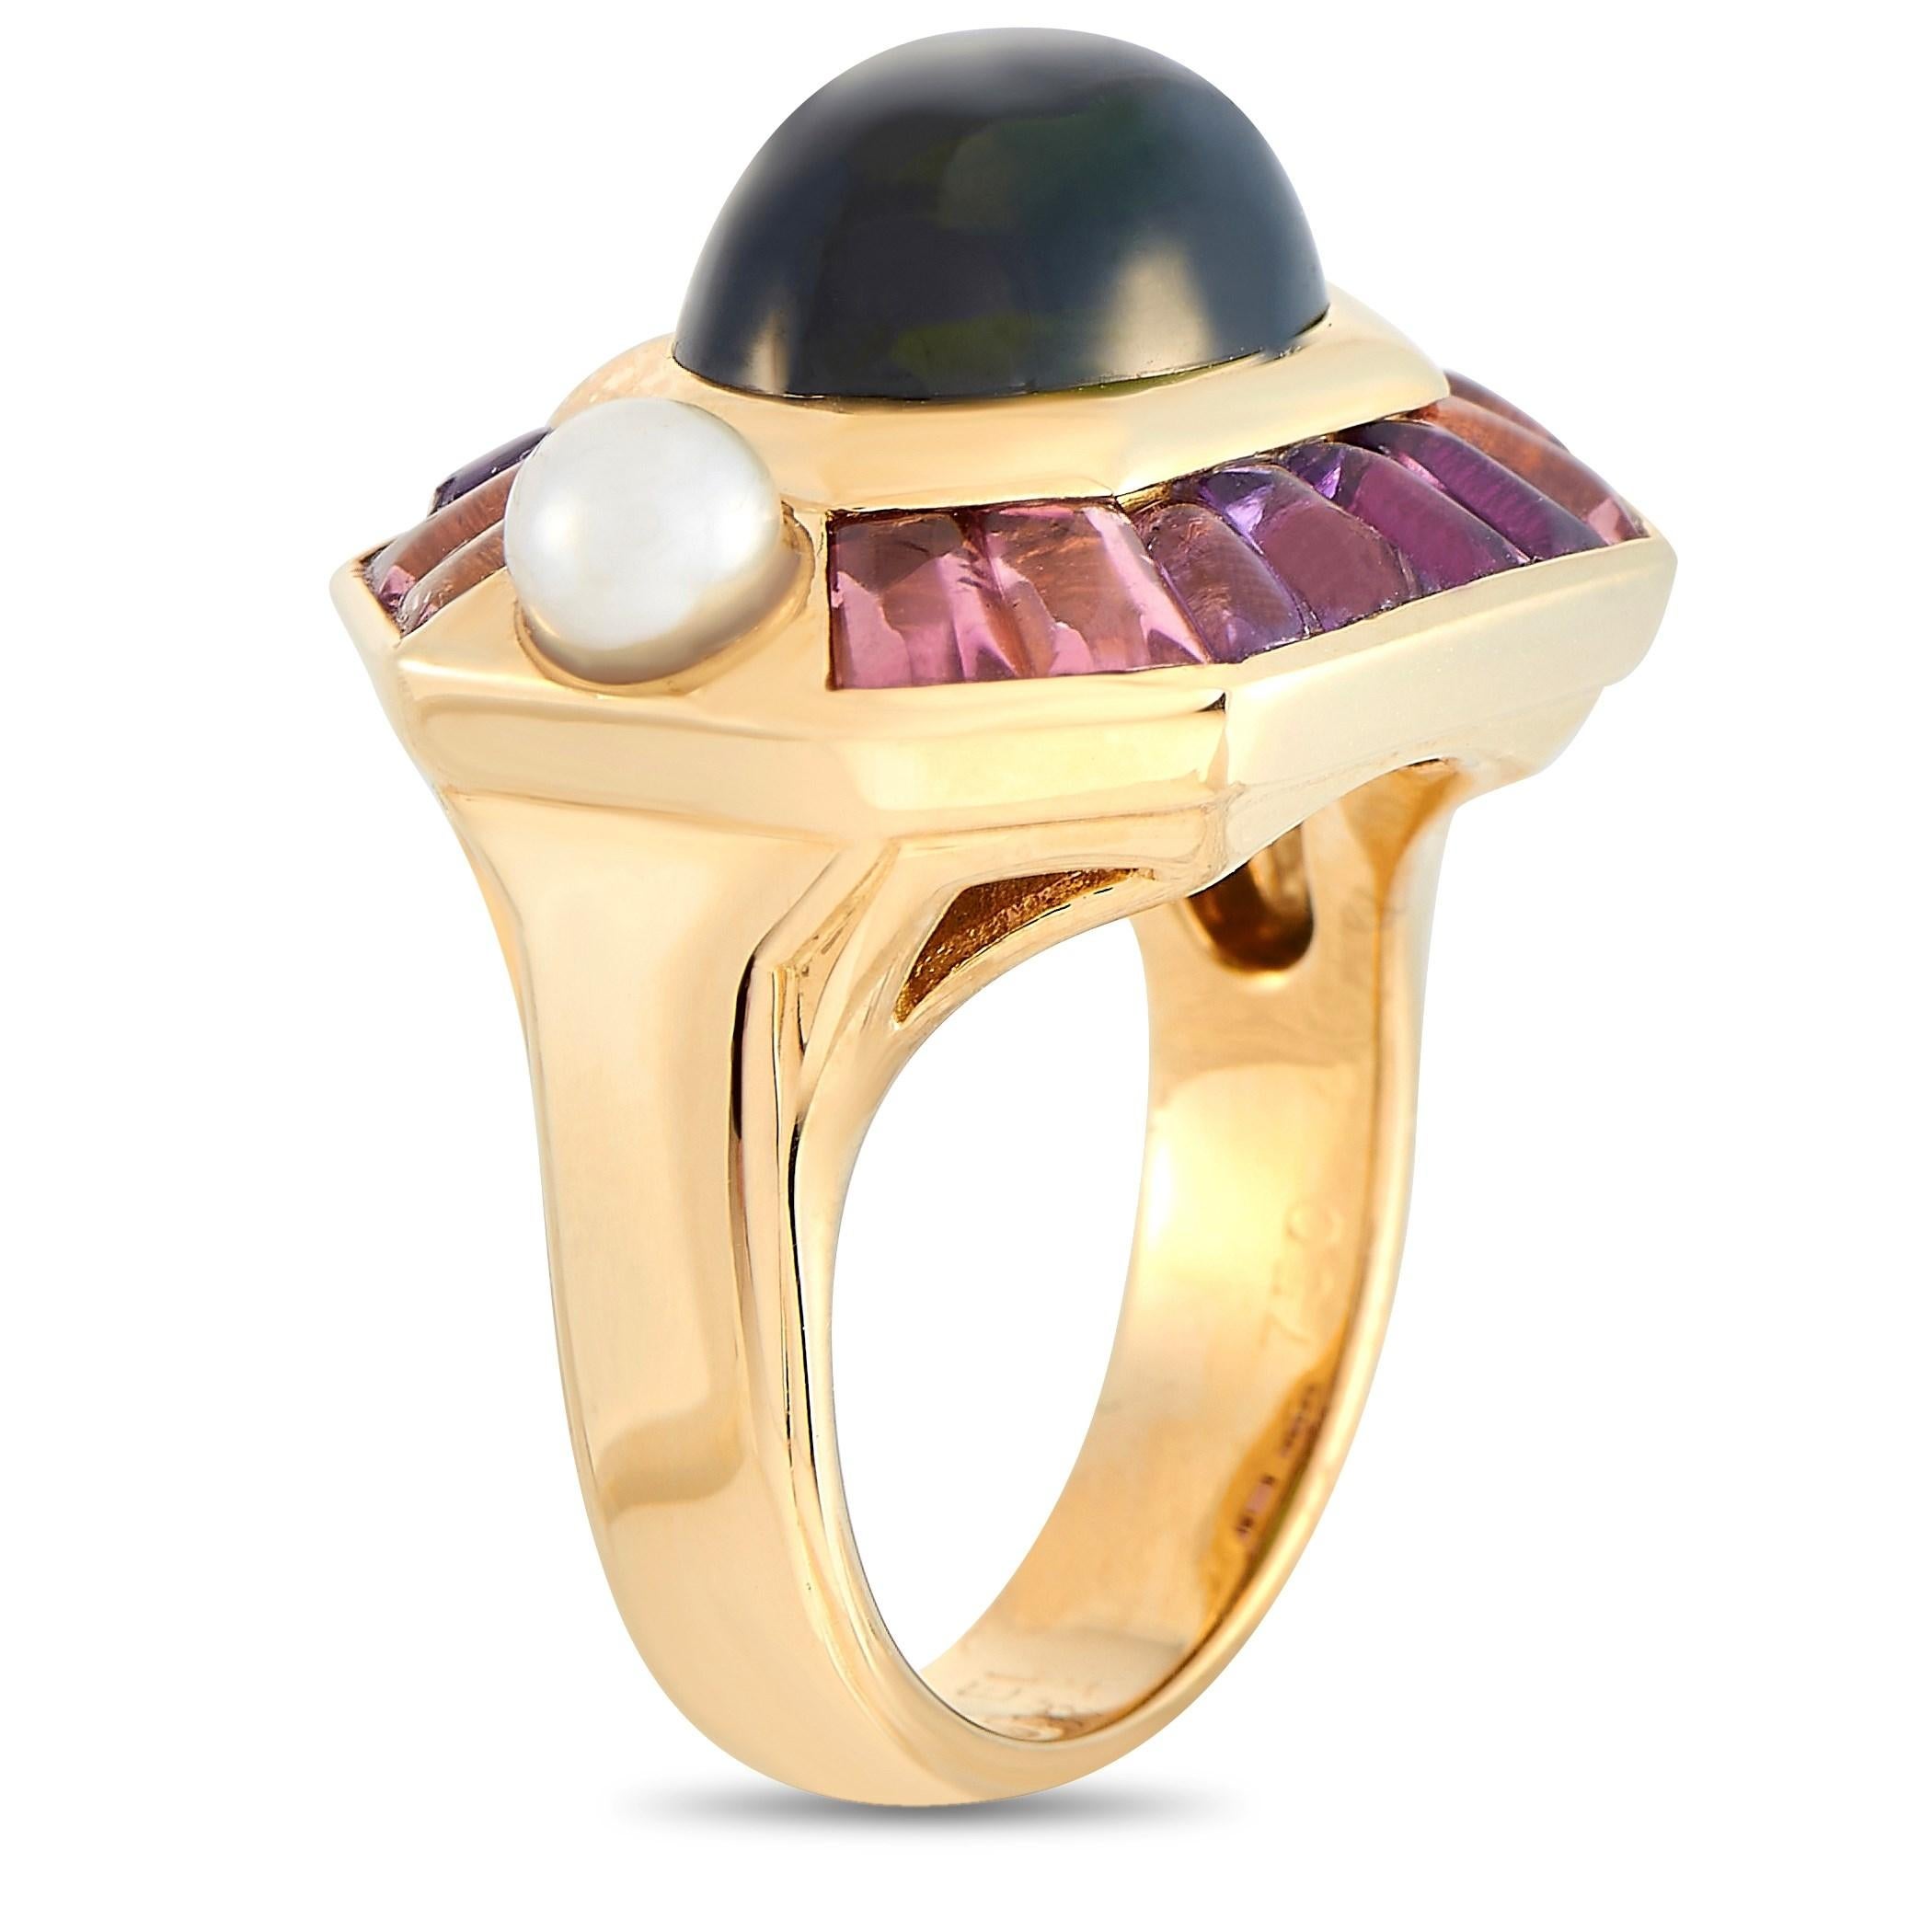 A mesmerizing sight from the Chanel Baroque collection that captivates with the feminine beauty of peridot and dazzles with alluring glisten of amethyst and pink gemstones. This outstanding ring from Chanel is made of 18K yellow gold and boasts two